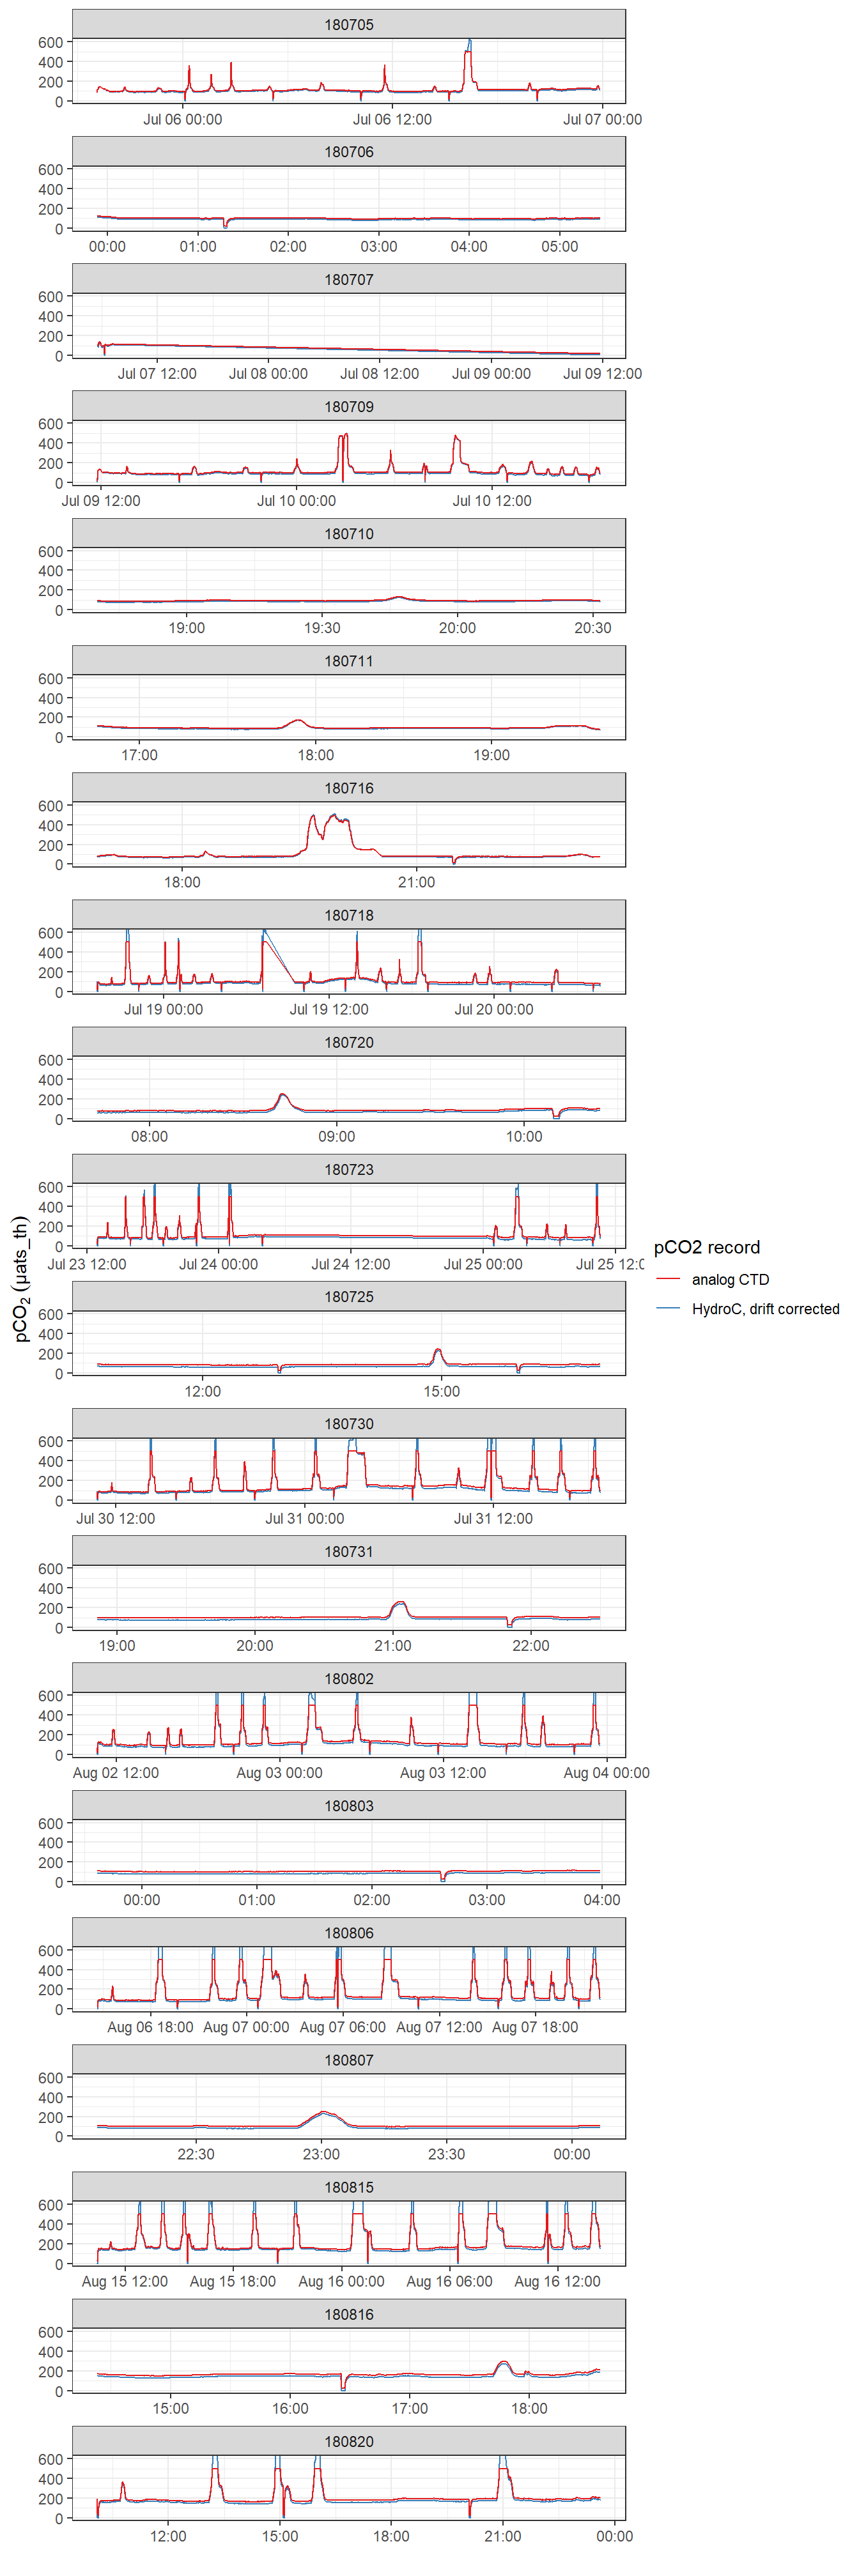 pCO~2~ record after interpolation to HydroC timestamp (analog output from HydroC and drift corrected data provided by Contos). ID refers to the starting date of each cruise. Please note that pCO2_analog measurement range is technically restricted to 100-500  µats_th. Zeroing periods are included.